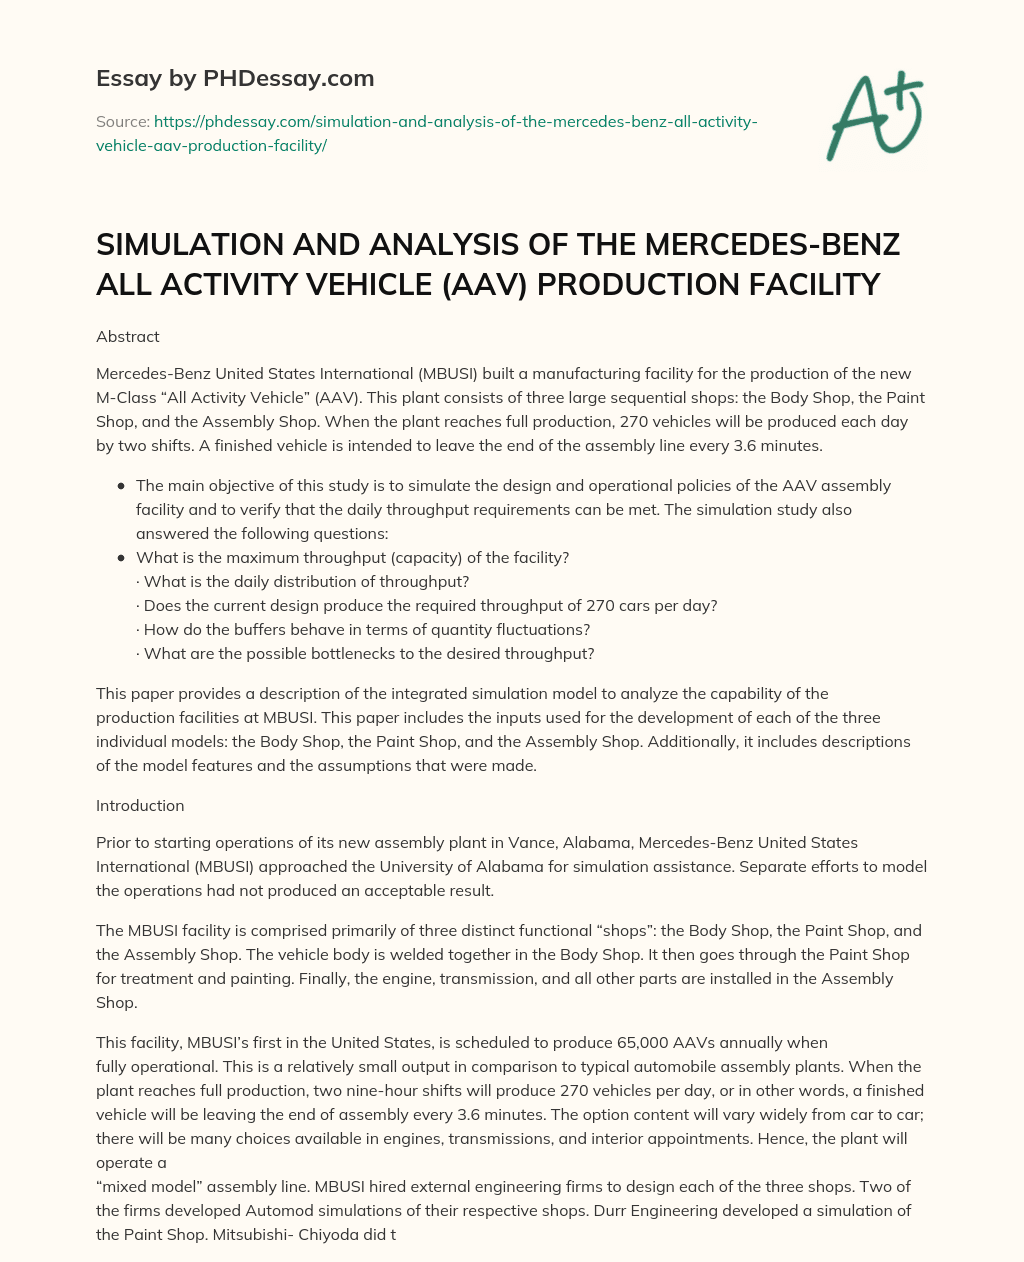 SIMULATION AND ANALYSIS OF THE MERCEDES-BENZ ALL ACTIVITY VEHICLE (AAV) PRODUCTION FACILITY essay